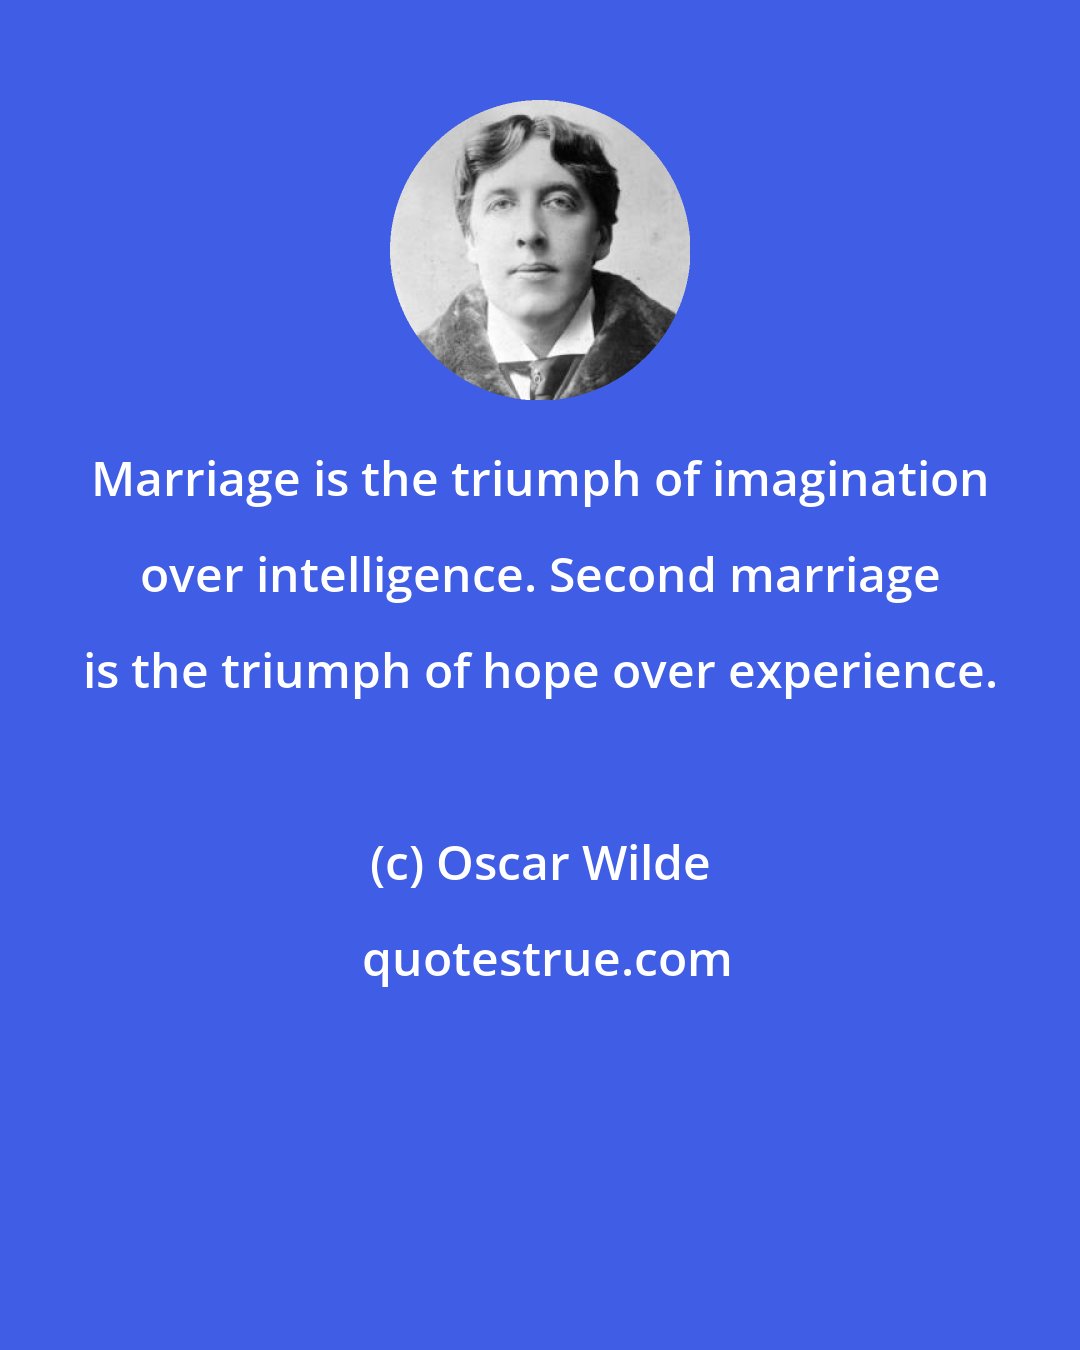 Oscar Wilde: Marriage is the triumph of imagination over intelligence. Second marriage is the triumph of hope over experience.